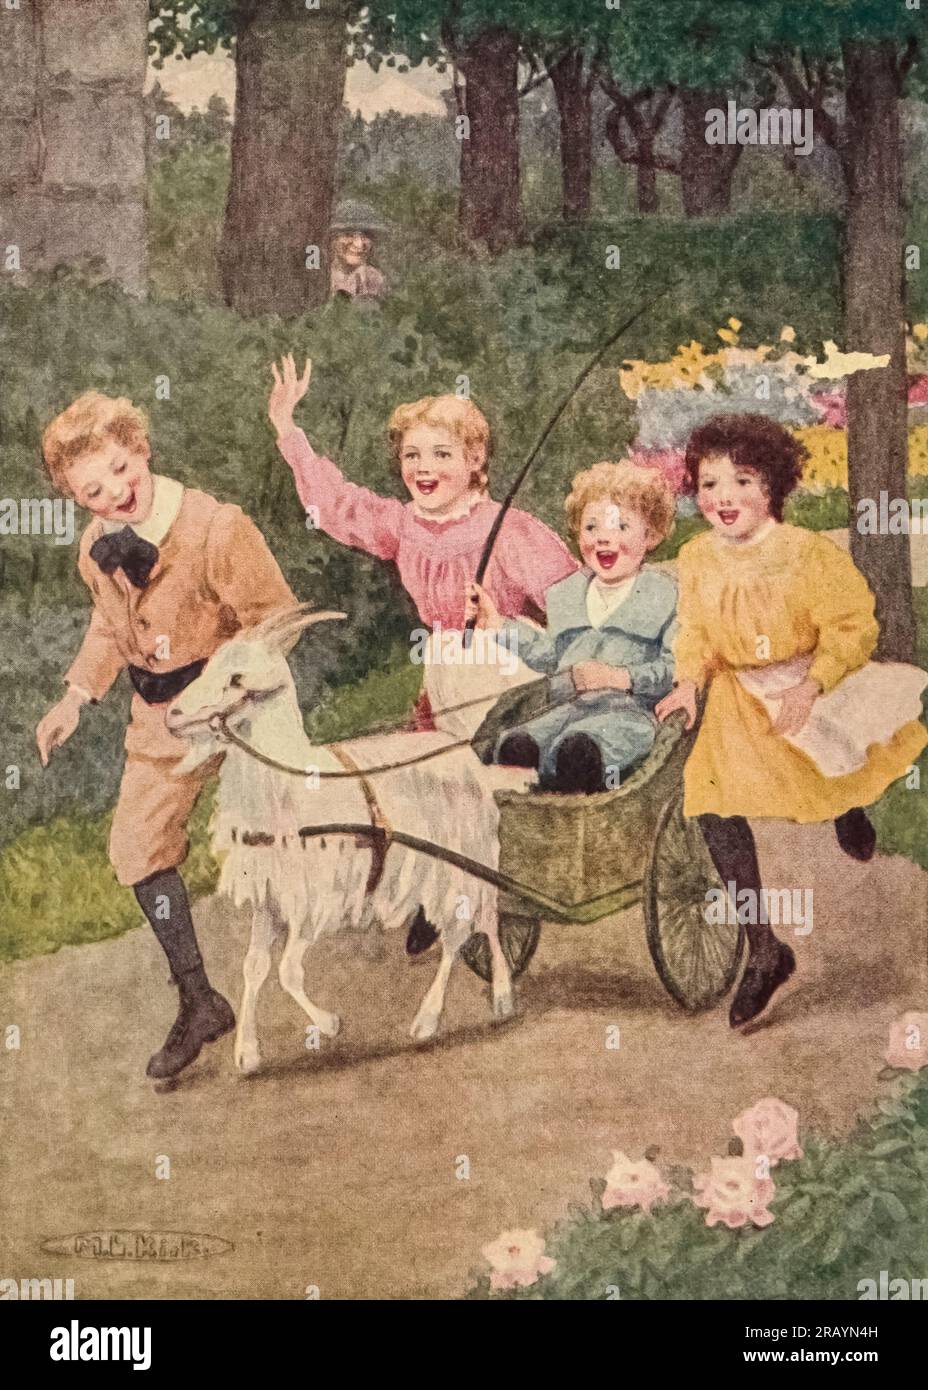 All the Children Were Screaming With Delight at the Wonderful Ride Frontispiece illustrated by Maria L. Kirk from the book ' Cornelli ' by Spyri, Johanna, 1827-1901 Publication date 1920 Publisher Philadelphia, London, J.B. Lippincott company Johanna Louise Spyri (12 June 1827 – 7 July 1901) was a Swiss author of novels, notably children's stories. She wrote the popular book Heidi. Born in Hirzel, a rural area in the canton of Zürich, as a child she spent several summers near Chur in Graubünden, the setting she later would use in her novels. Stock Photo